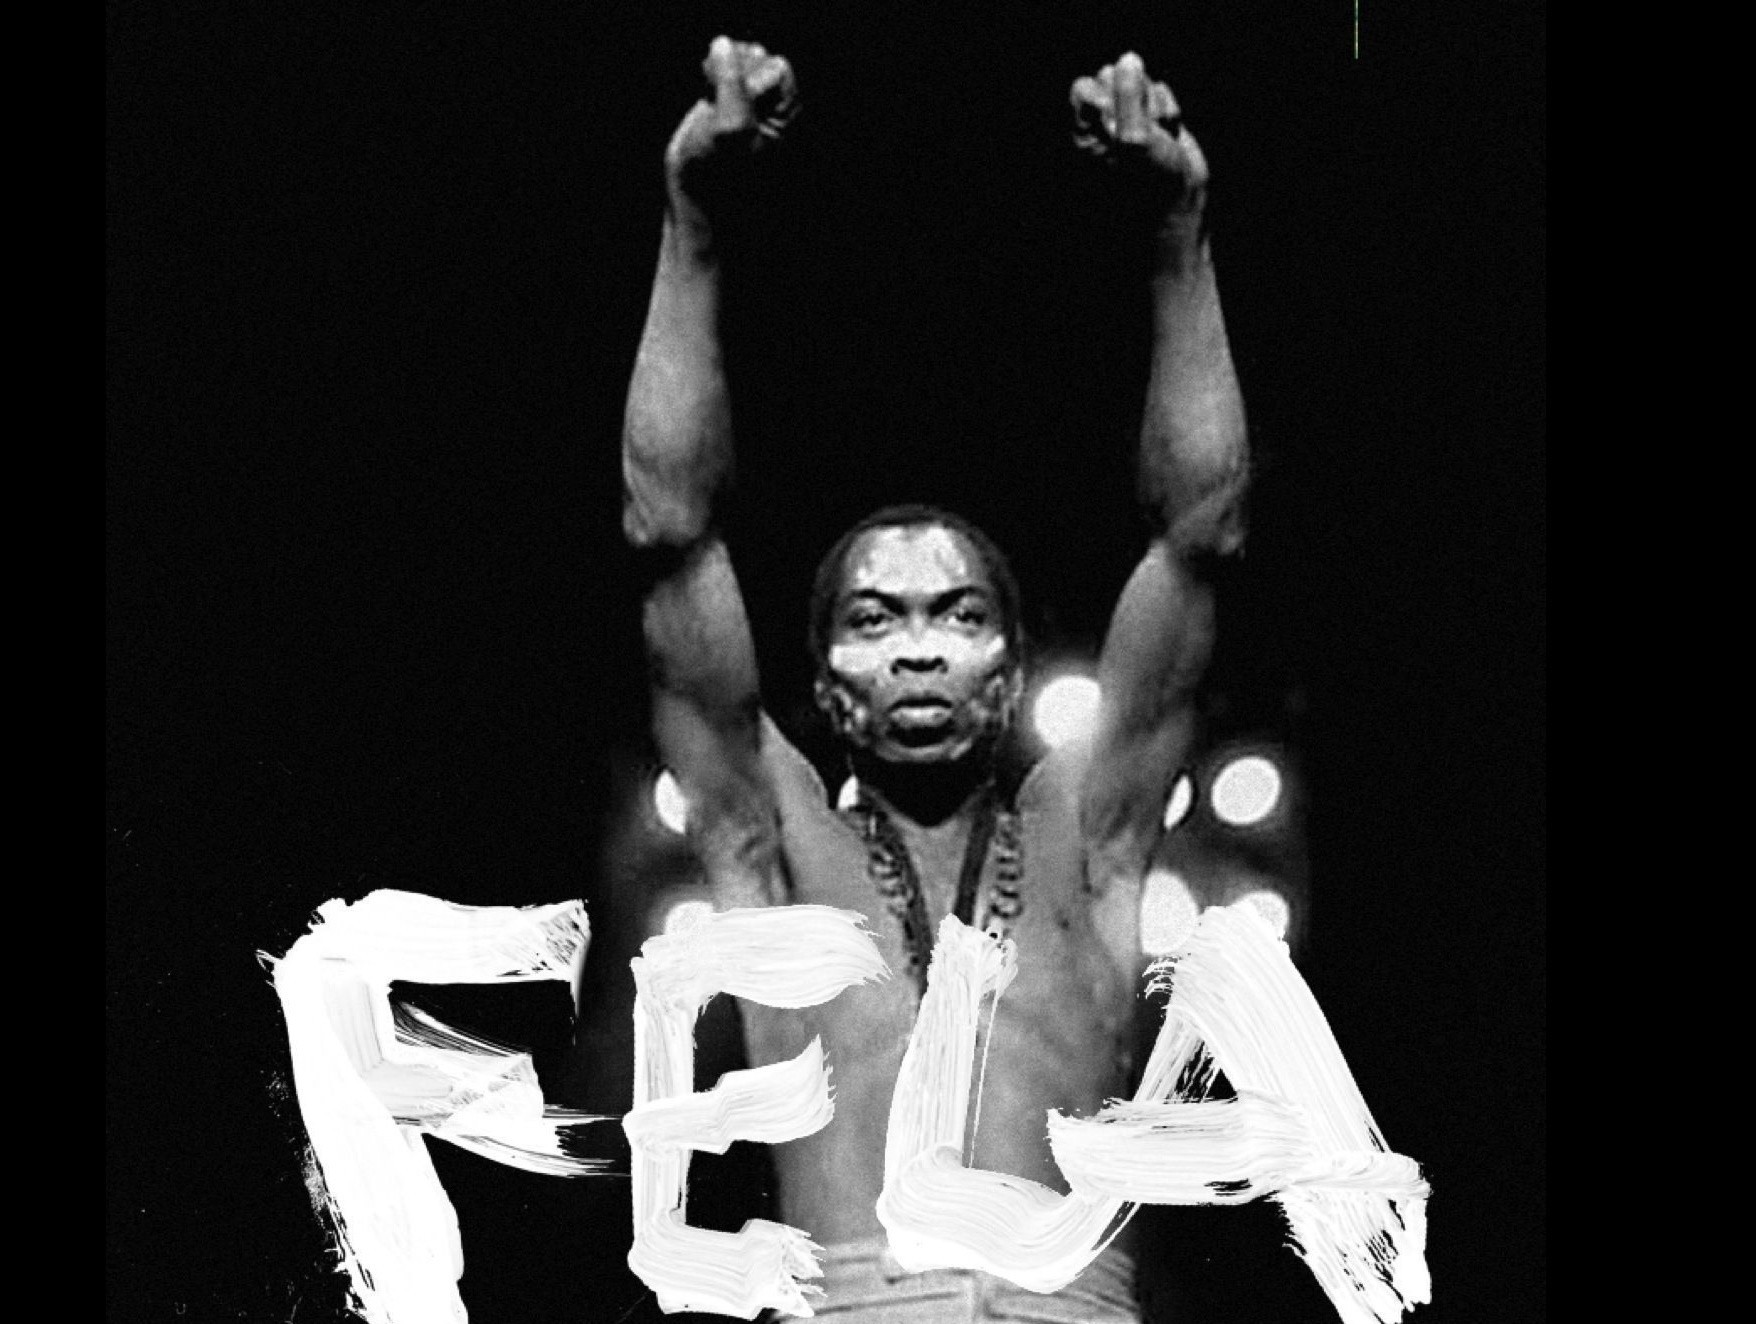 London Officials Cancelled Felabration Event at the Notting Hill Carnival